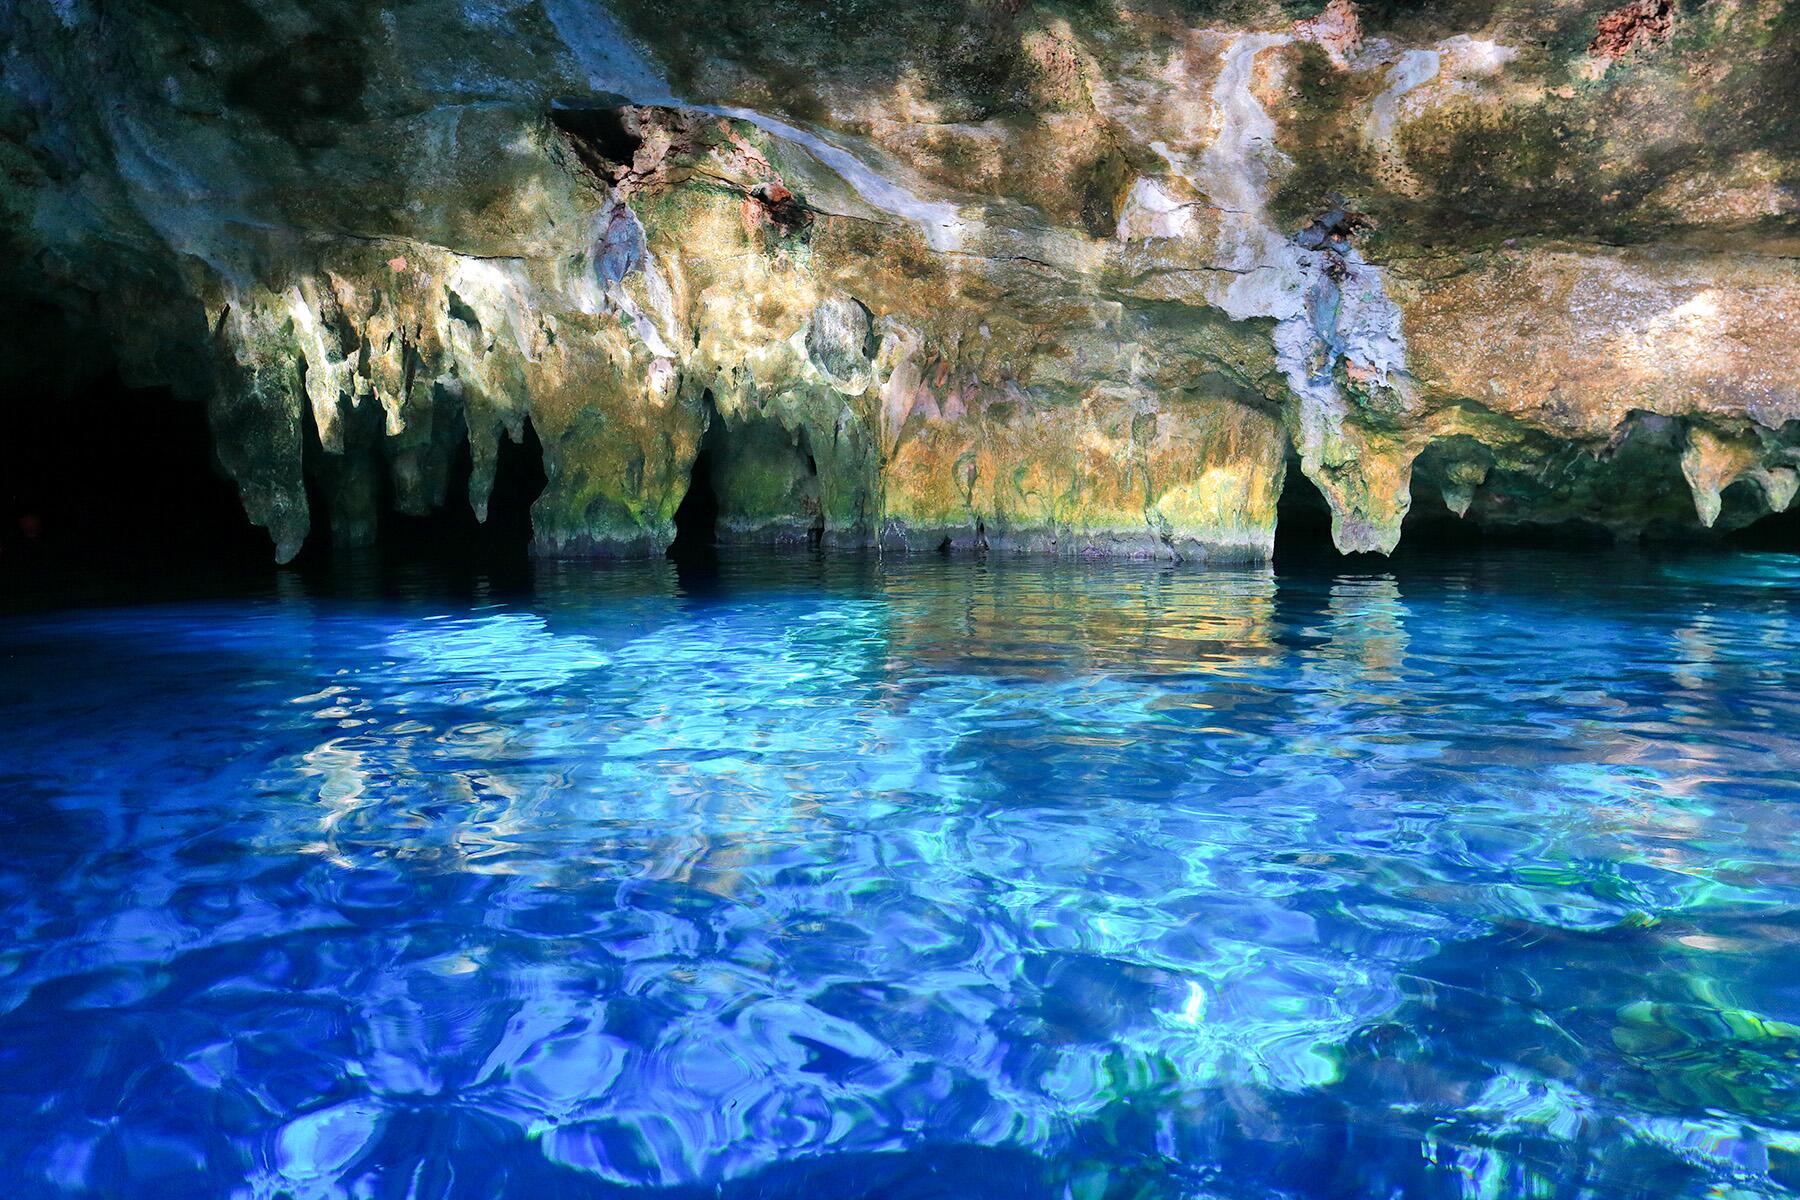 <a href='https://www.fodors.com/world/mexico-and-central-america/mexico/the-riviera-maya/experiences/news/photos/best-cenotes-to-visit-in-riviera-maya#'>From &quot;The 10 Most Magical Cenotes in the Riviera Maya: Gran Cenote&quot;</a>